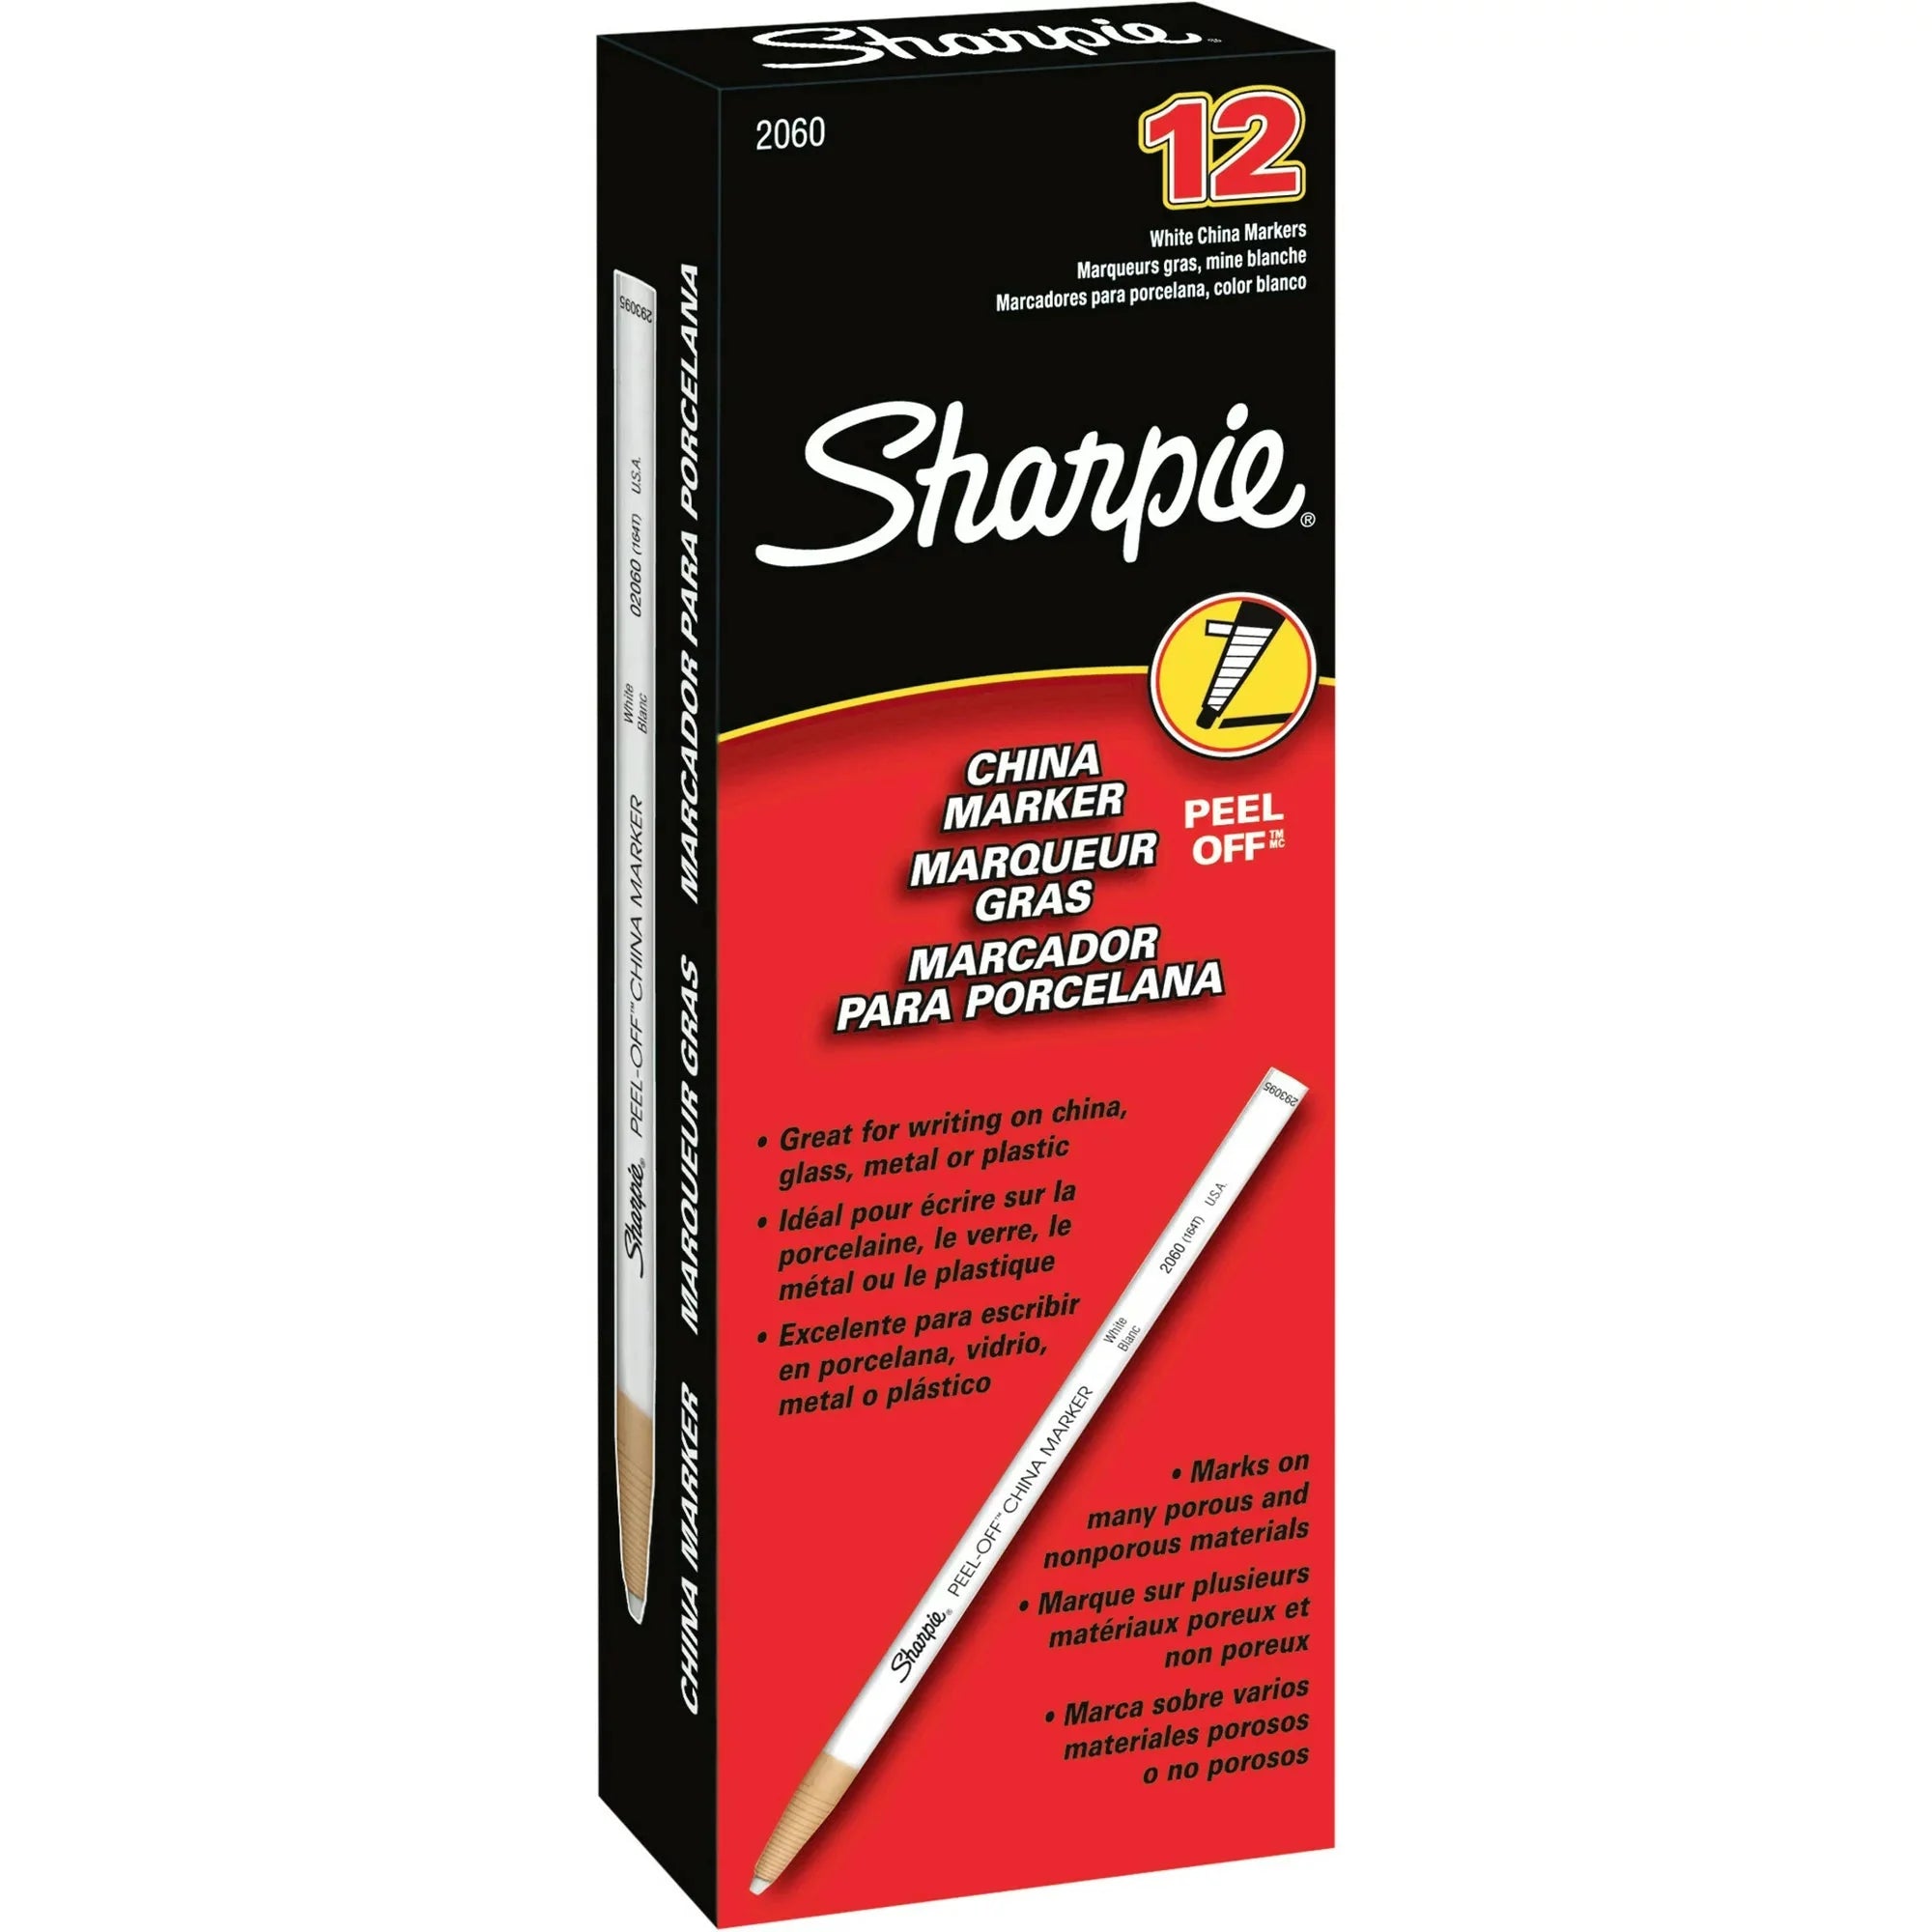 Wholesale prices with free shipping all over United States Sharpie, SAN2060, Peel-Off China Marker, 12 / Dozen - Steven Deals